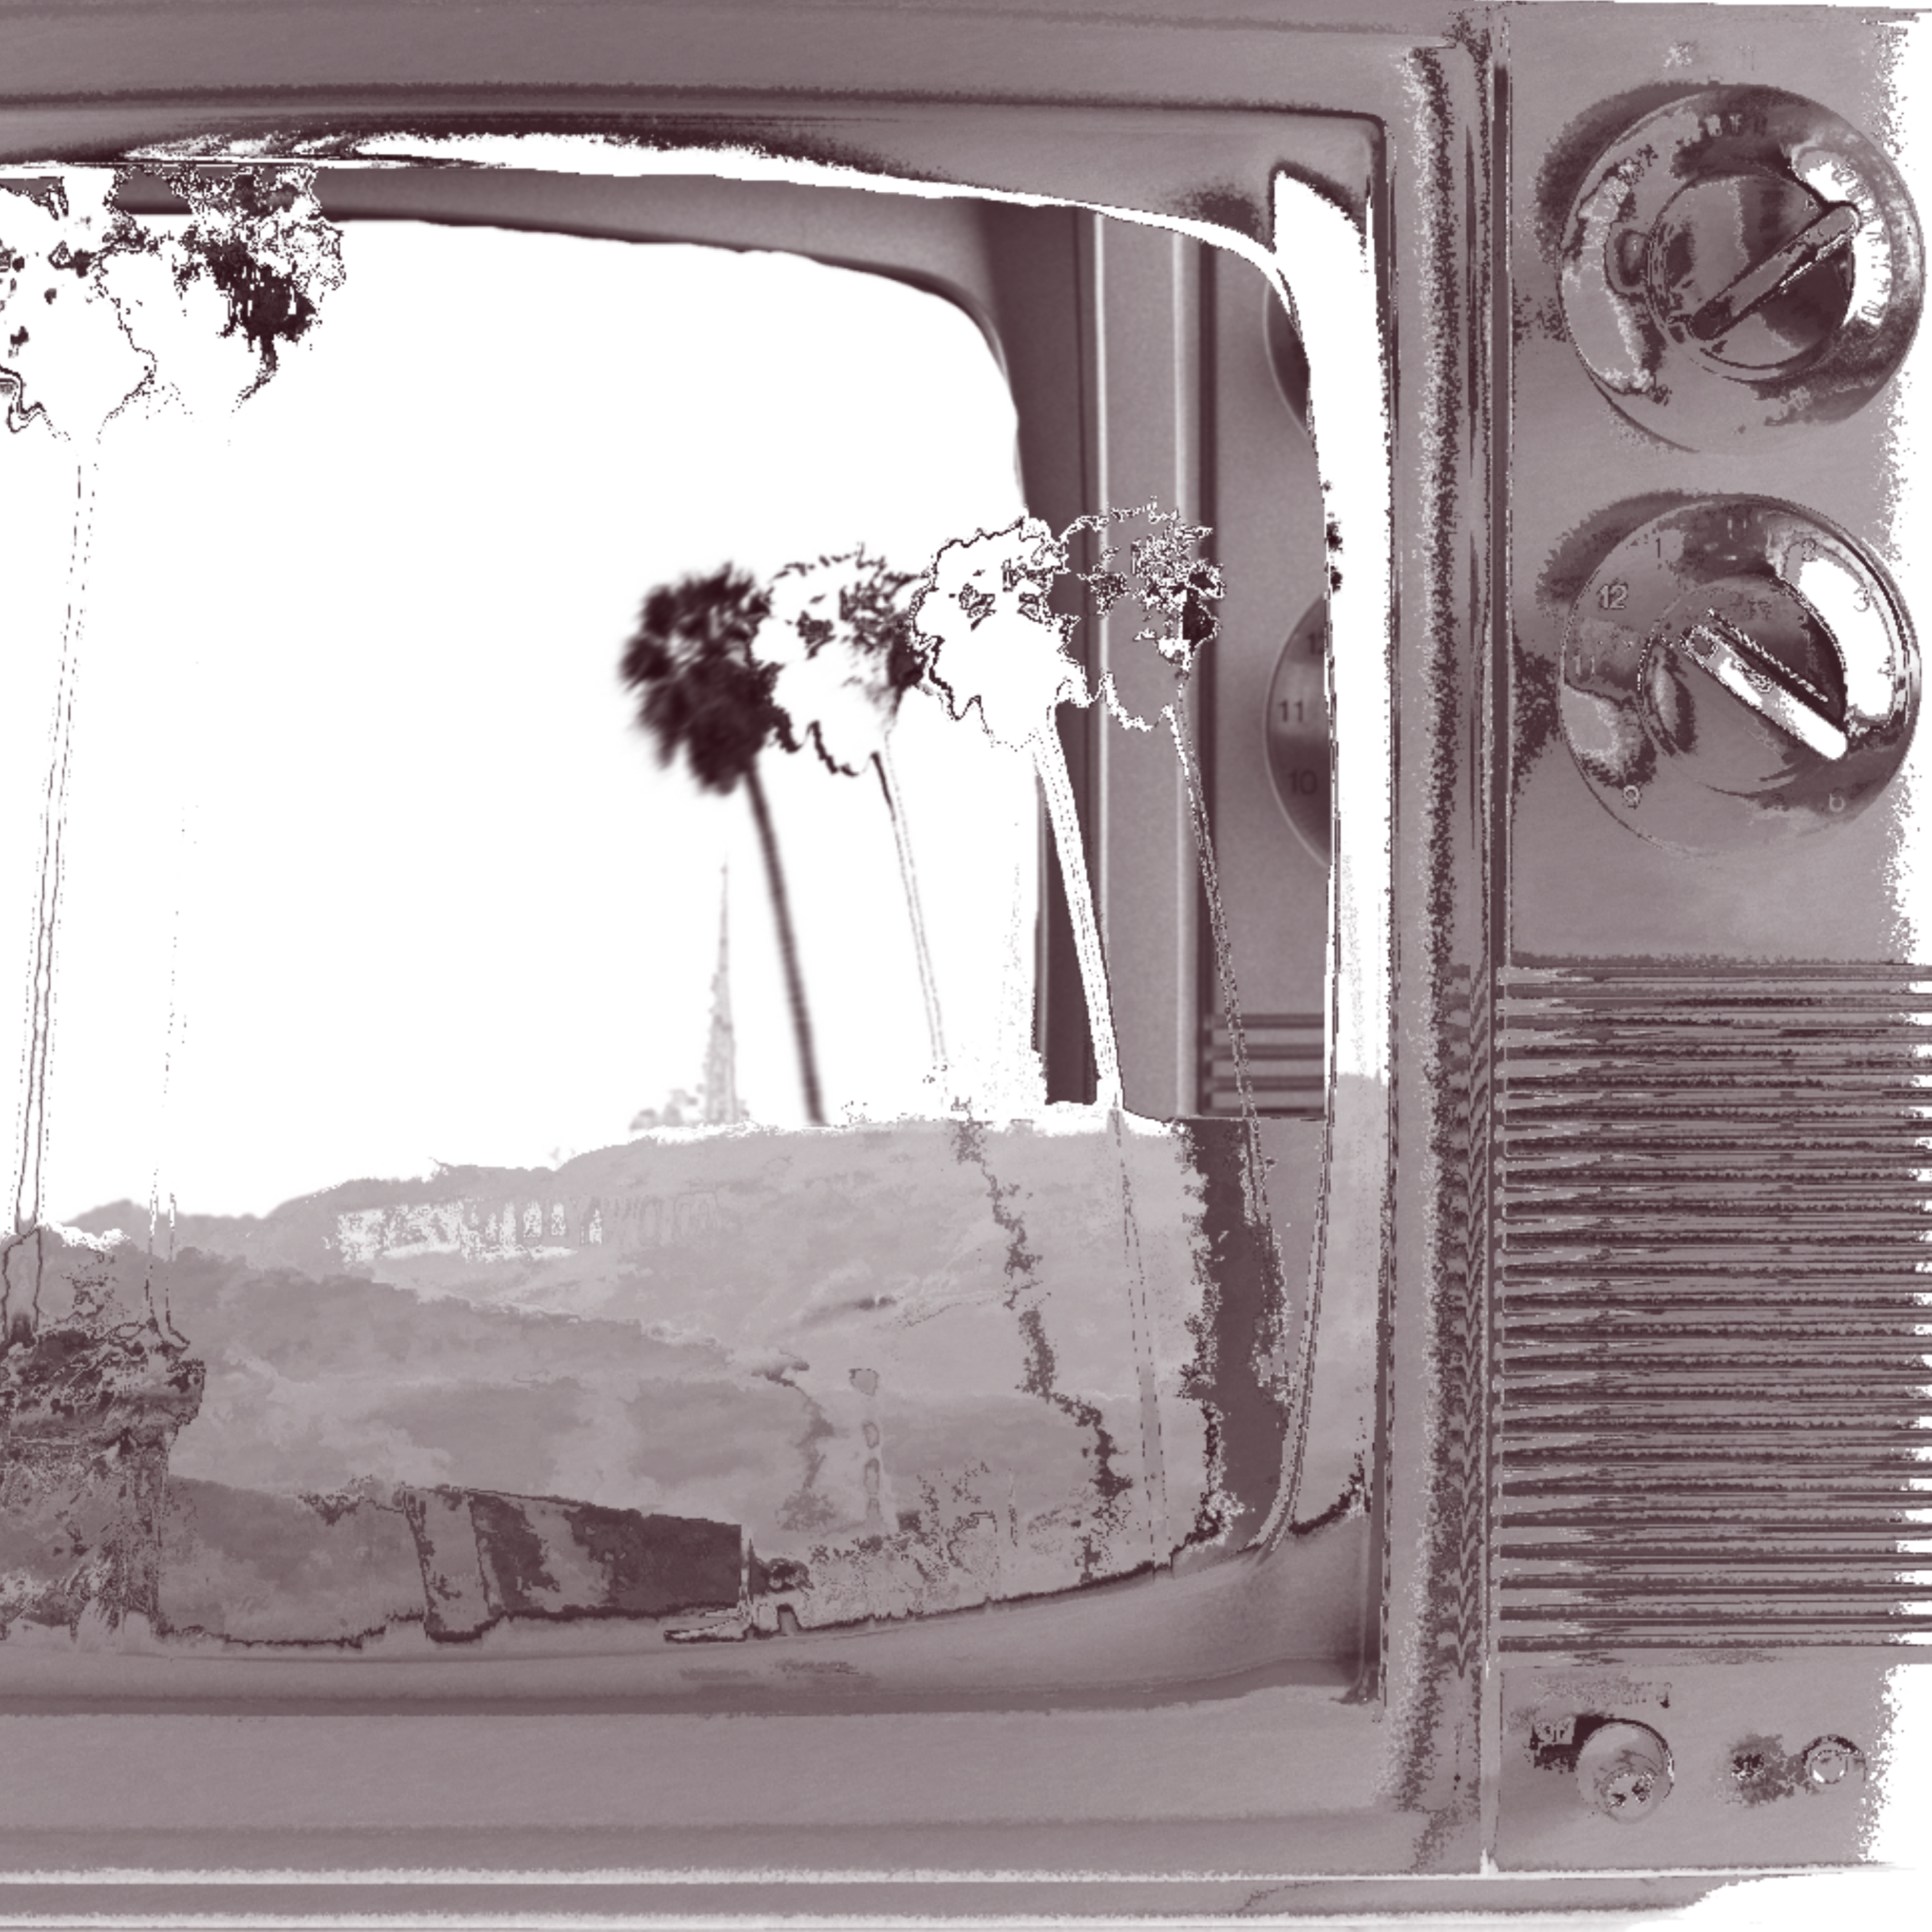 A greyscale image of a television featuring on screen a vague image of a beach with a palm tree.